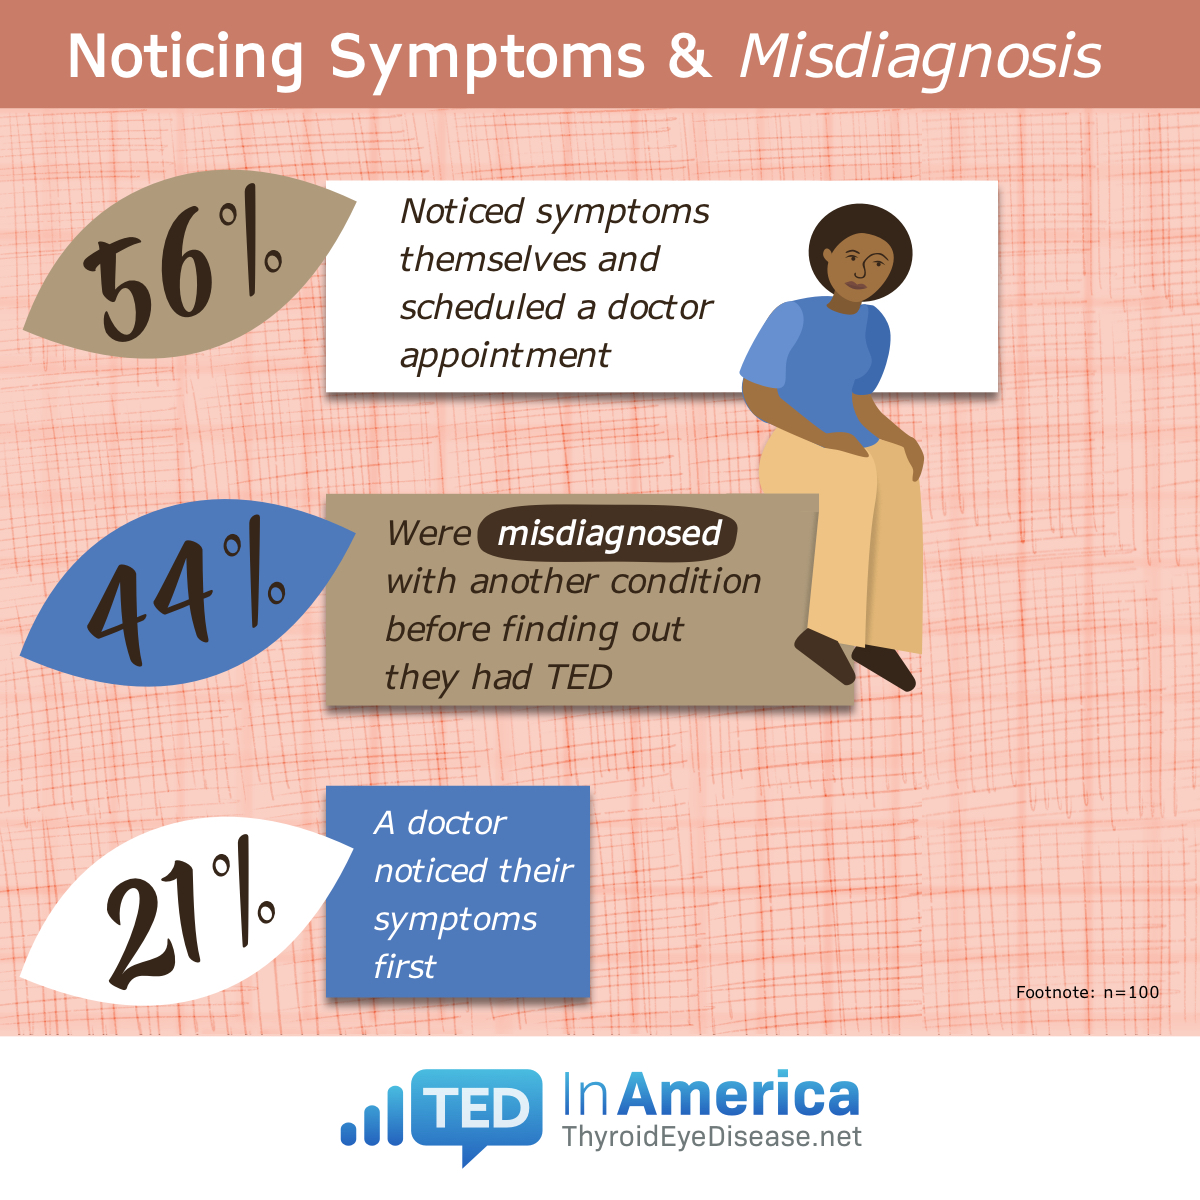 Noticing Symptoms and Misdiagnosis: 56% Noticed symptoms themselves and scheduled a doctor appointment, 44% were misdiagnosed with another condition before finding out they had thyroid eye disease, and 21% a doctor noticed symptoms first.